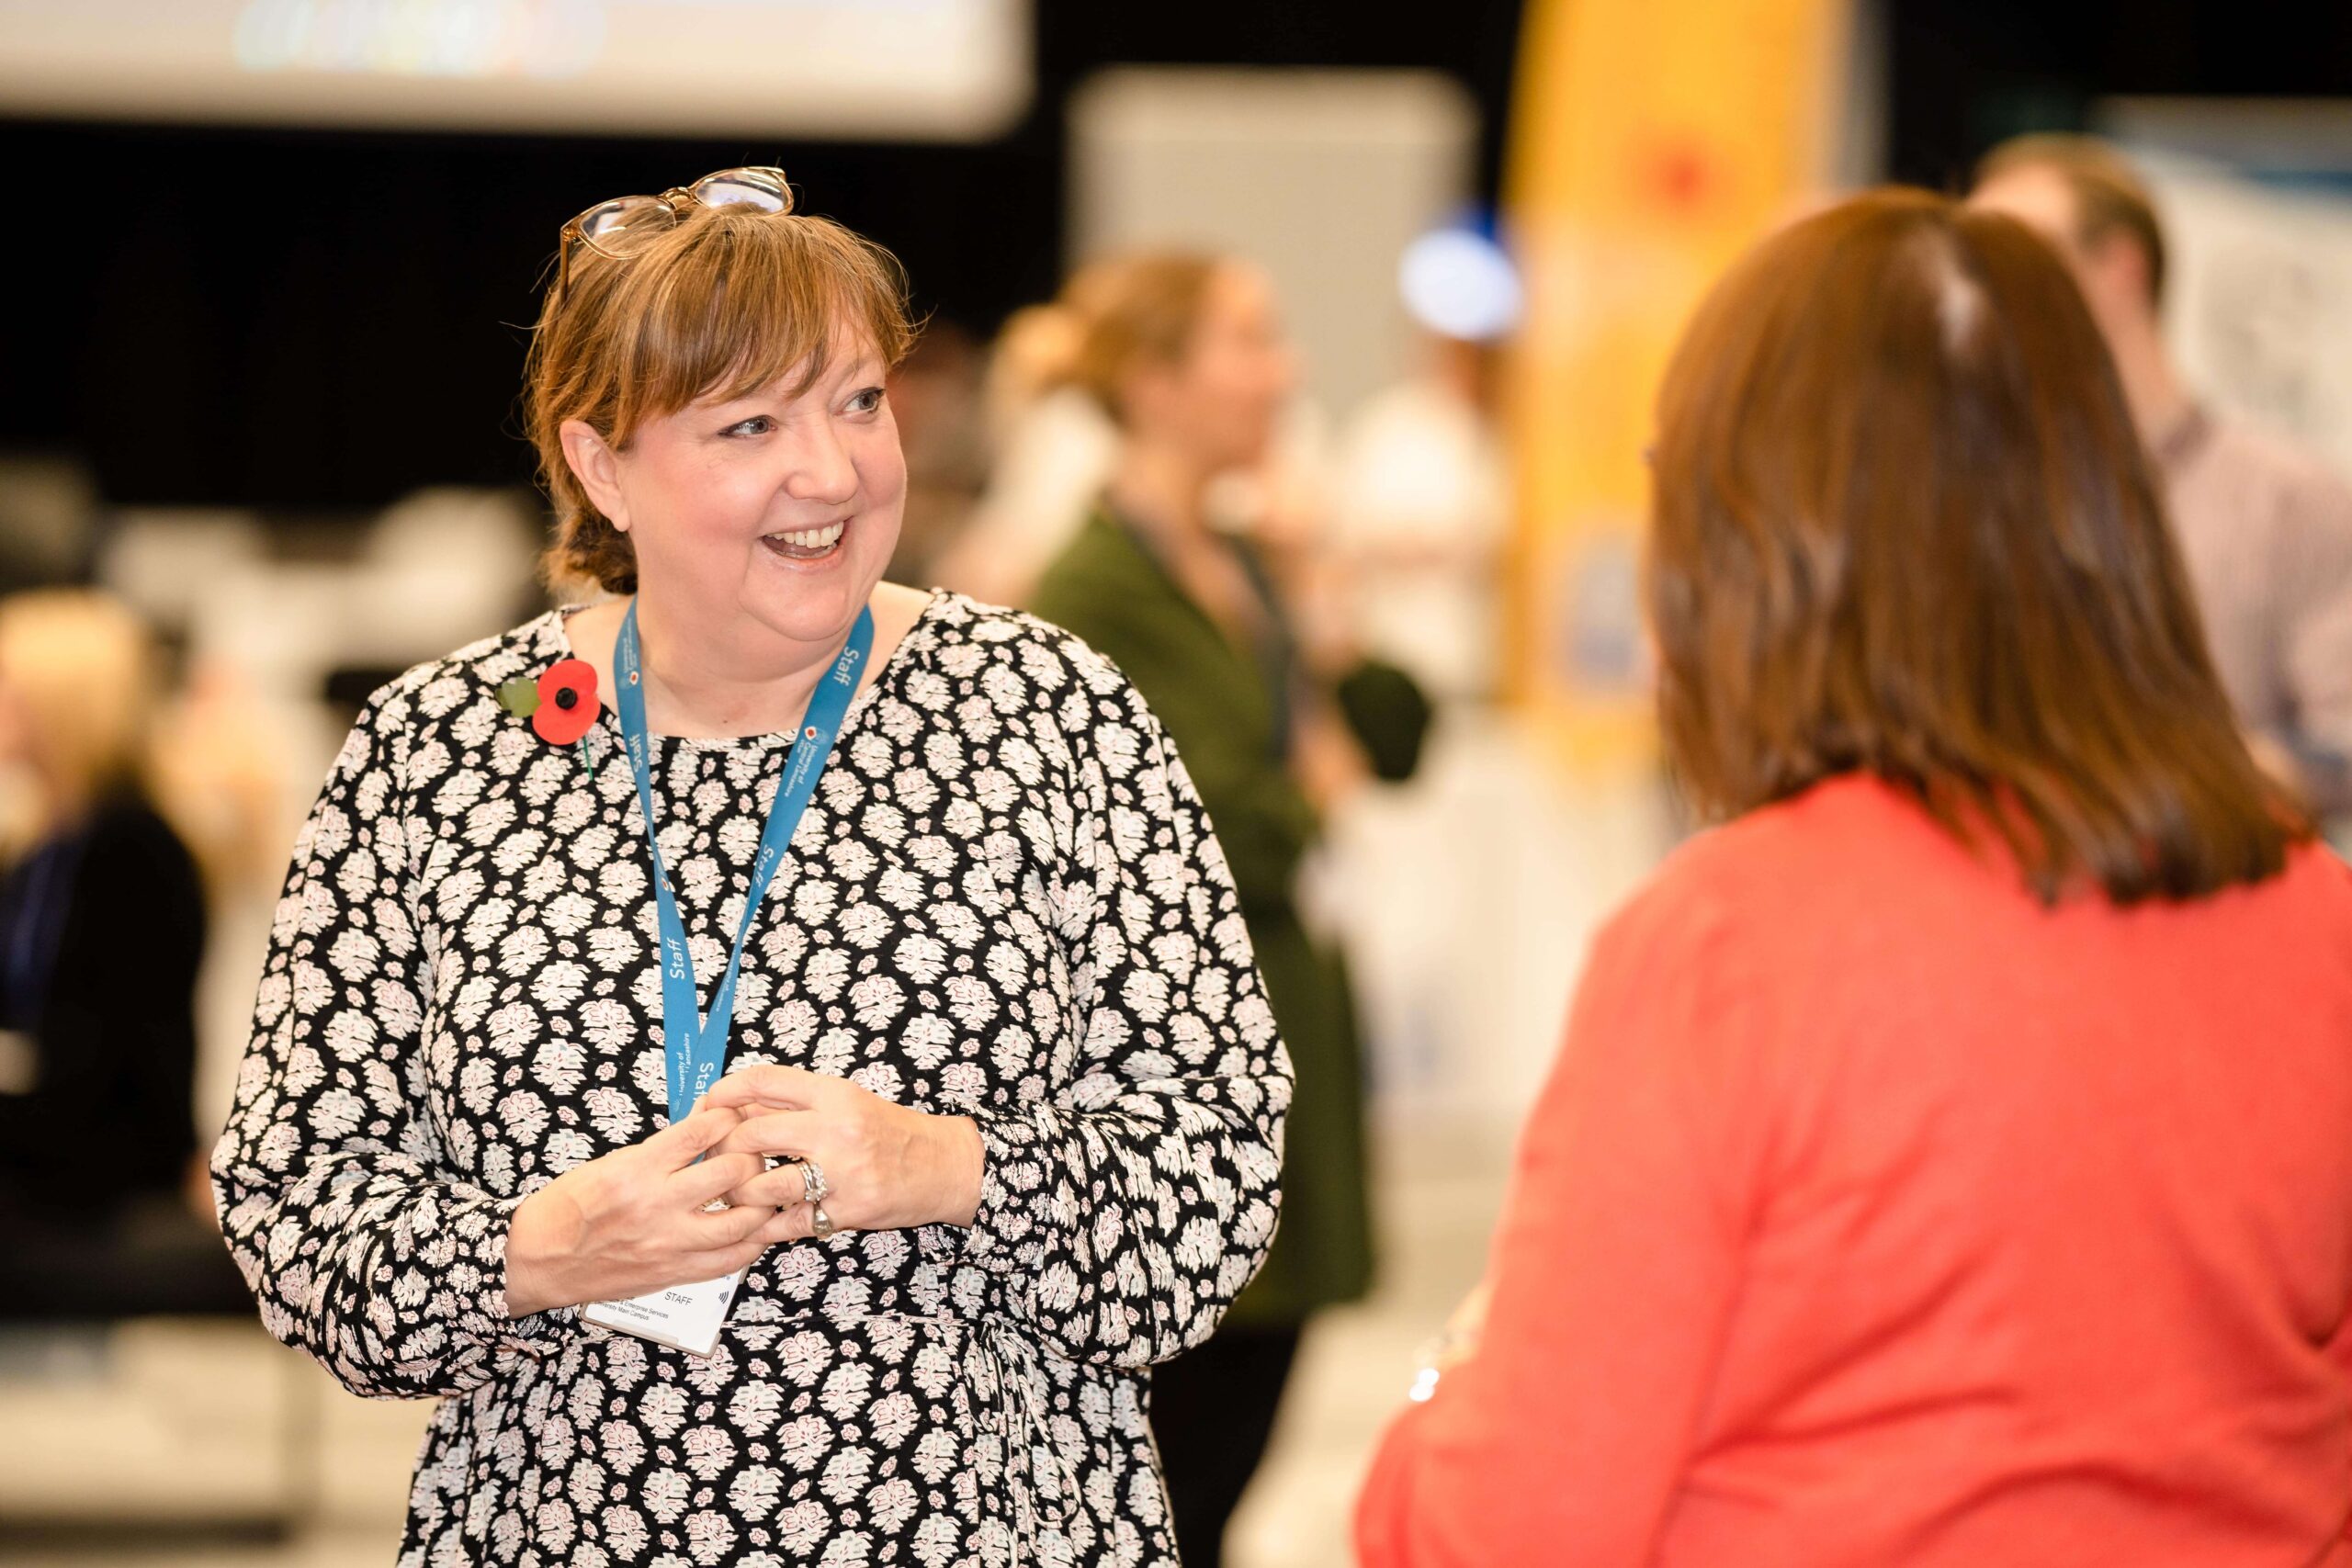 A Blackpool Business Expo visitor speaking to an exhibitor